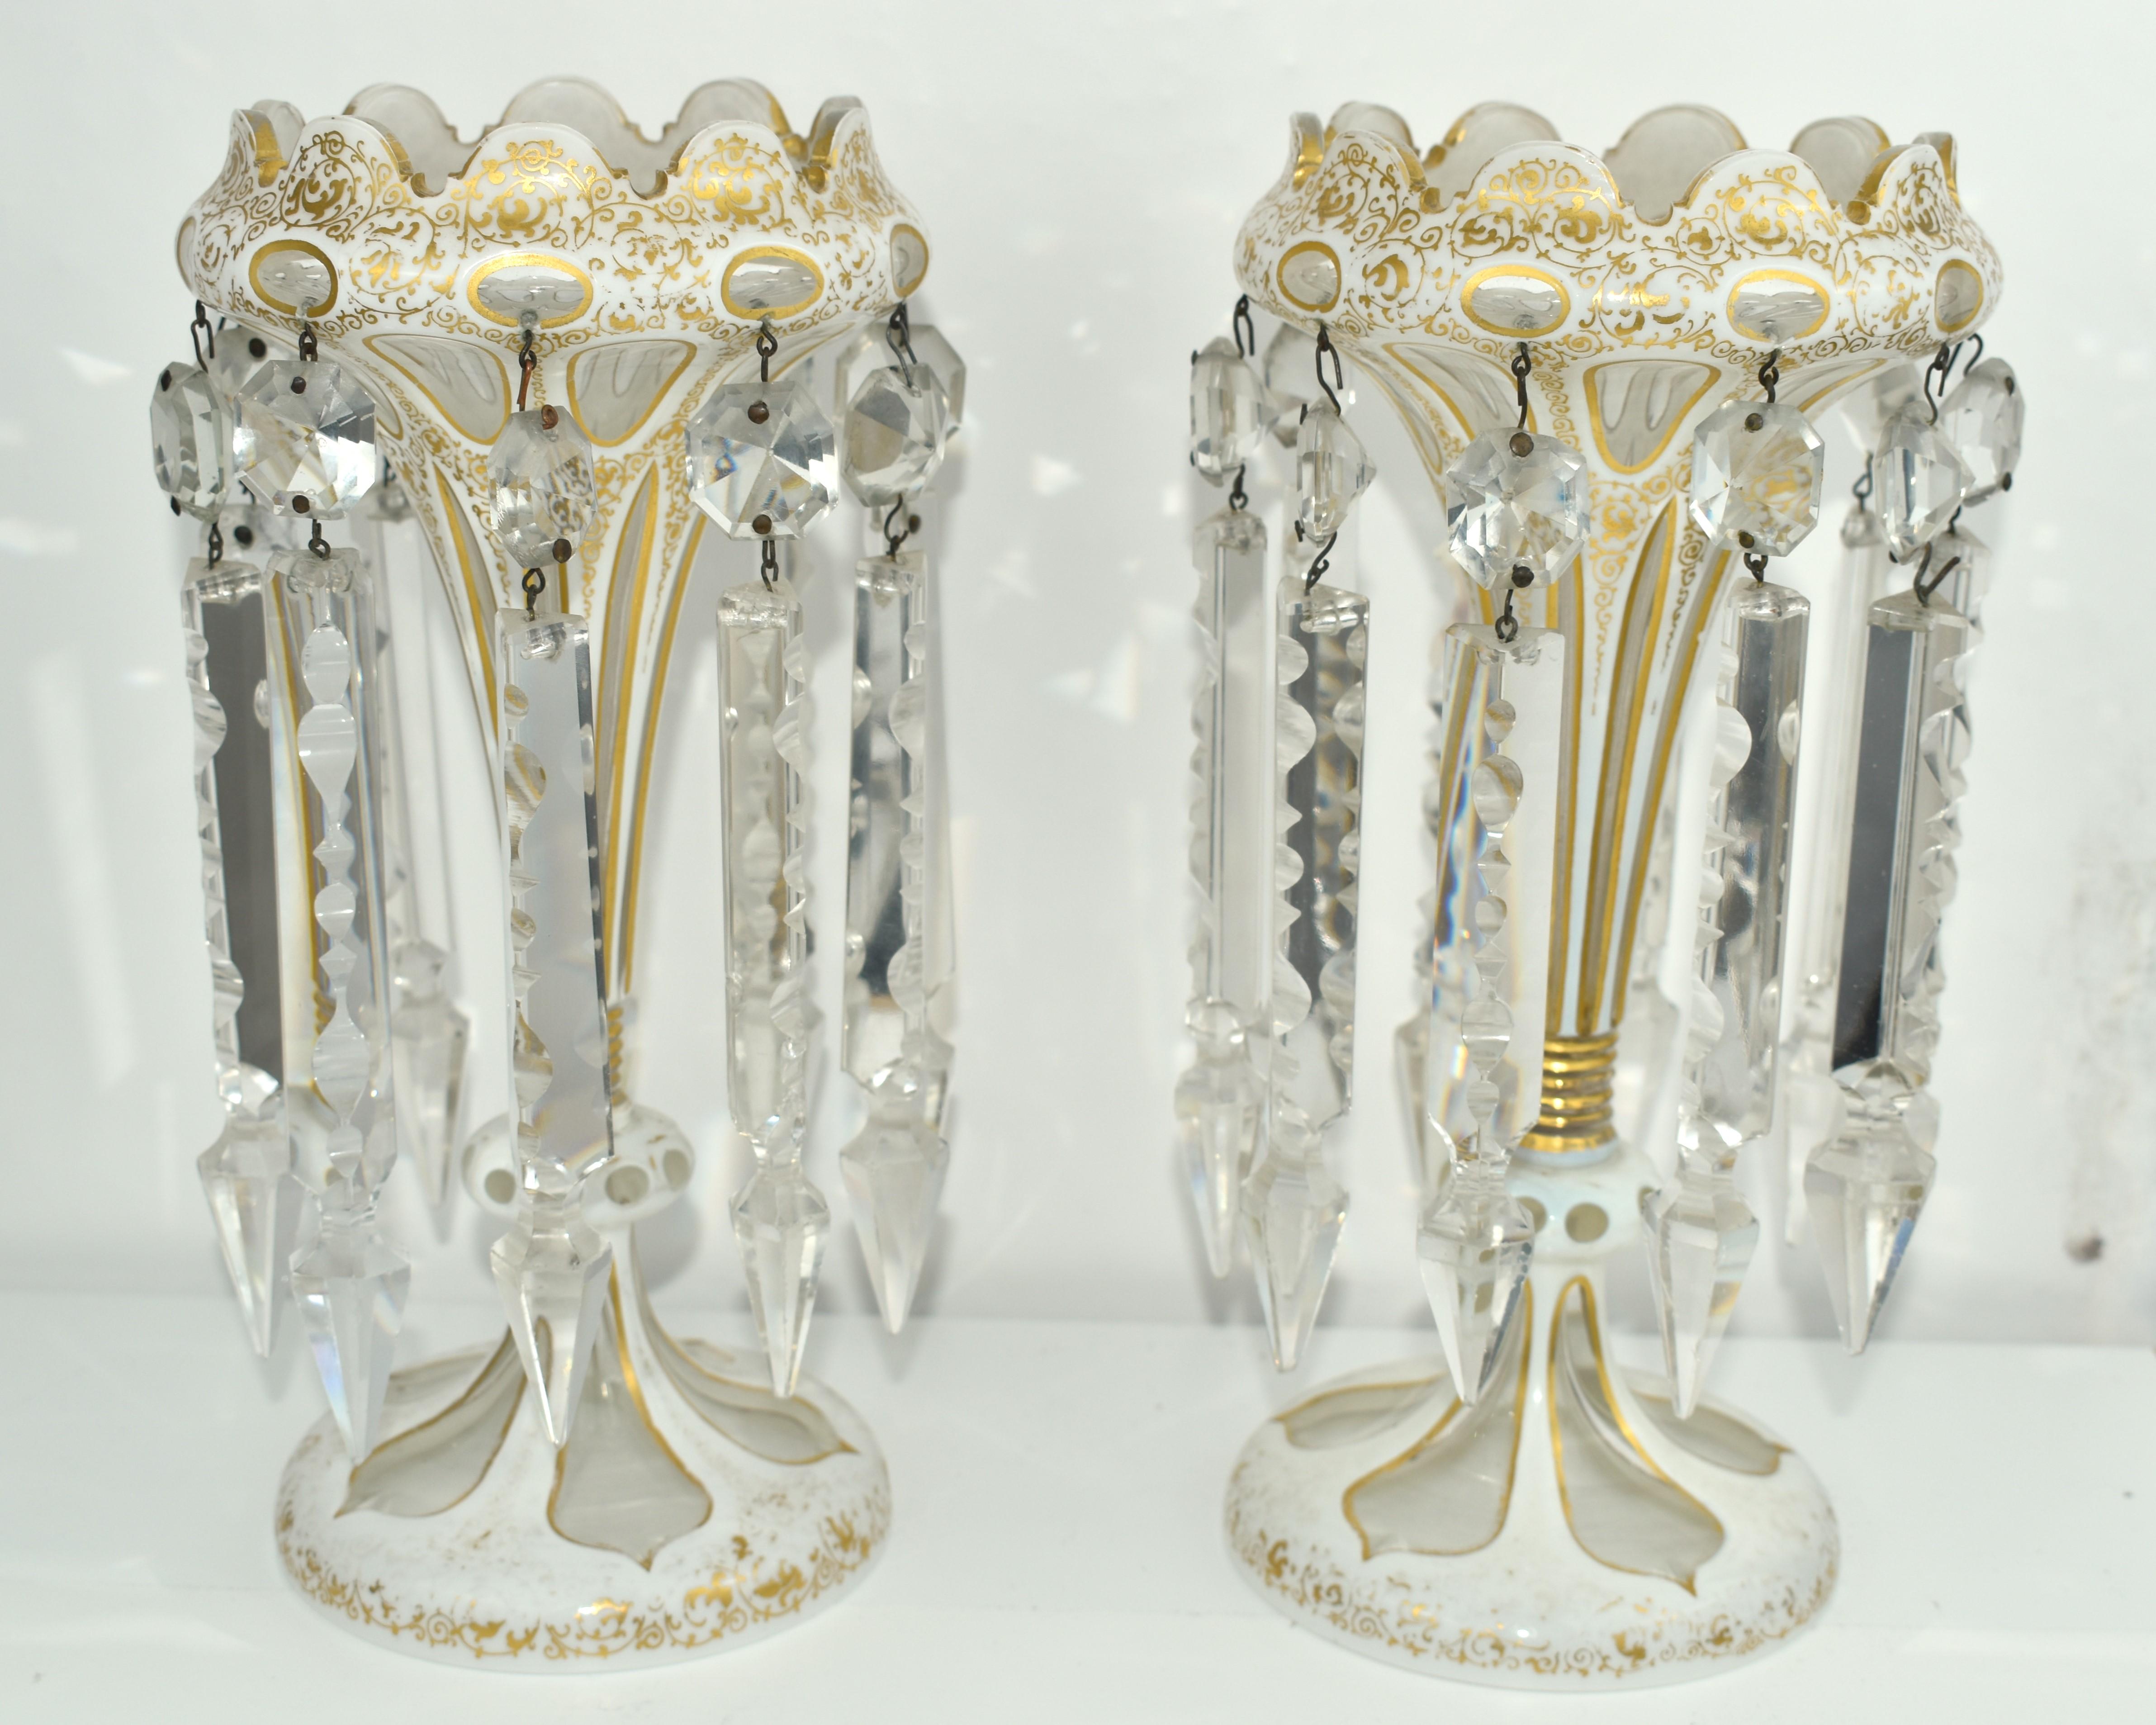 Gilt ANTIQUE PAIR OF GILDED BOHEMIAN OVERLAY CRYSTAL GLASS LUSTRES, 19th CENTURY For Sale